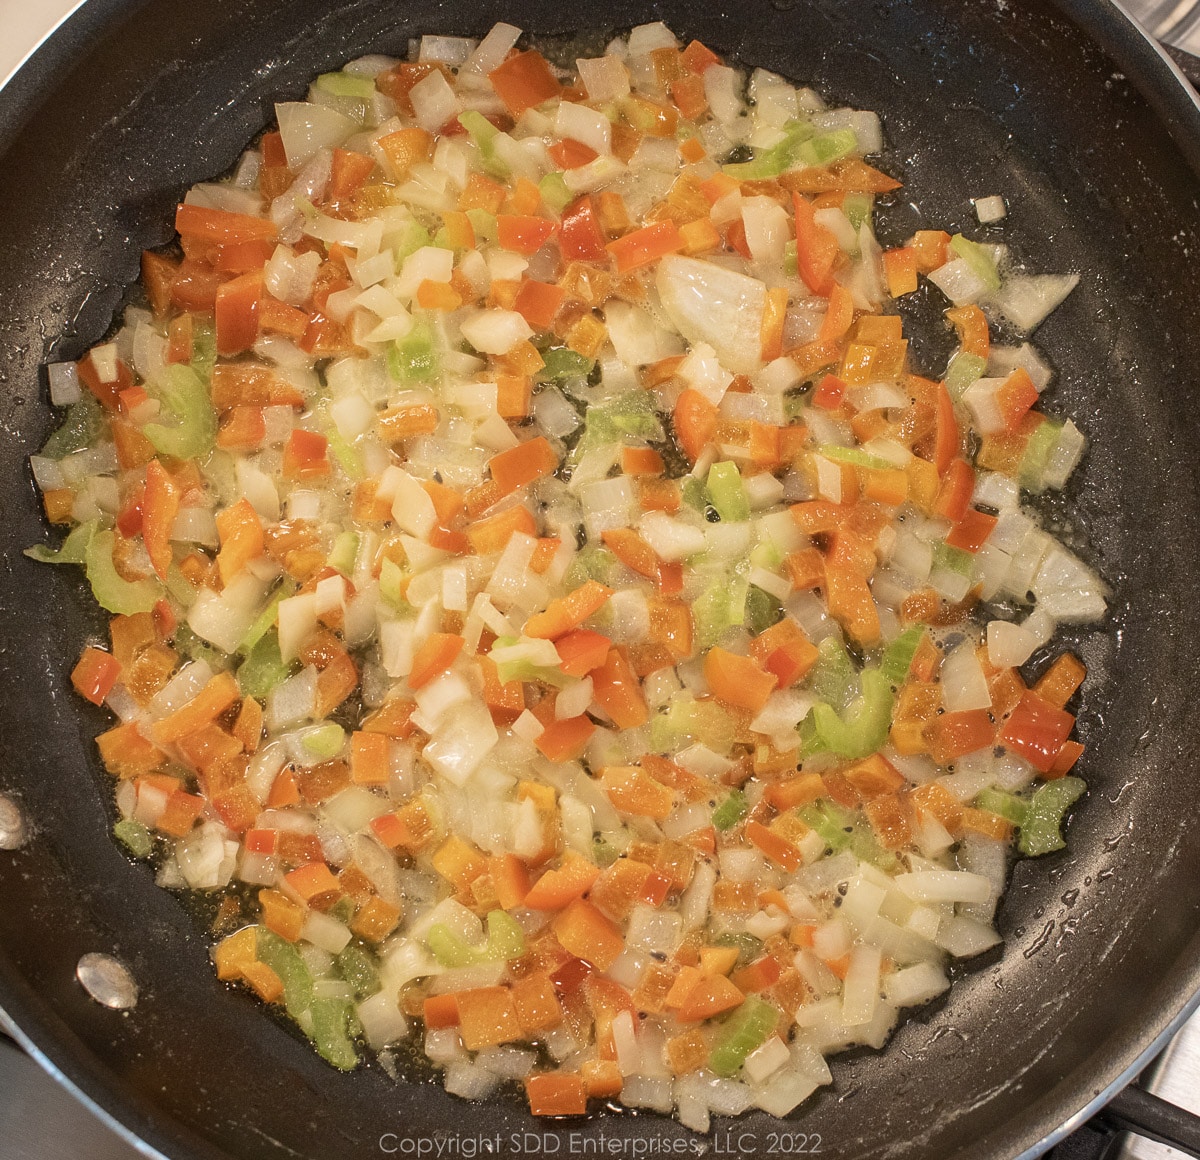 onions, peppers and celery sautéing in butter in a sauté pan